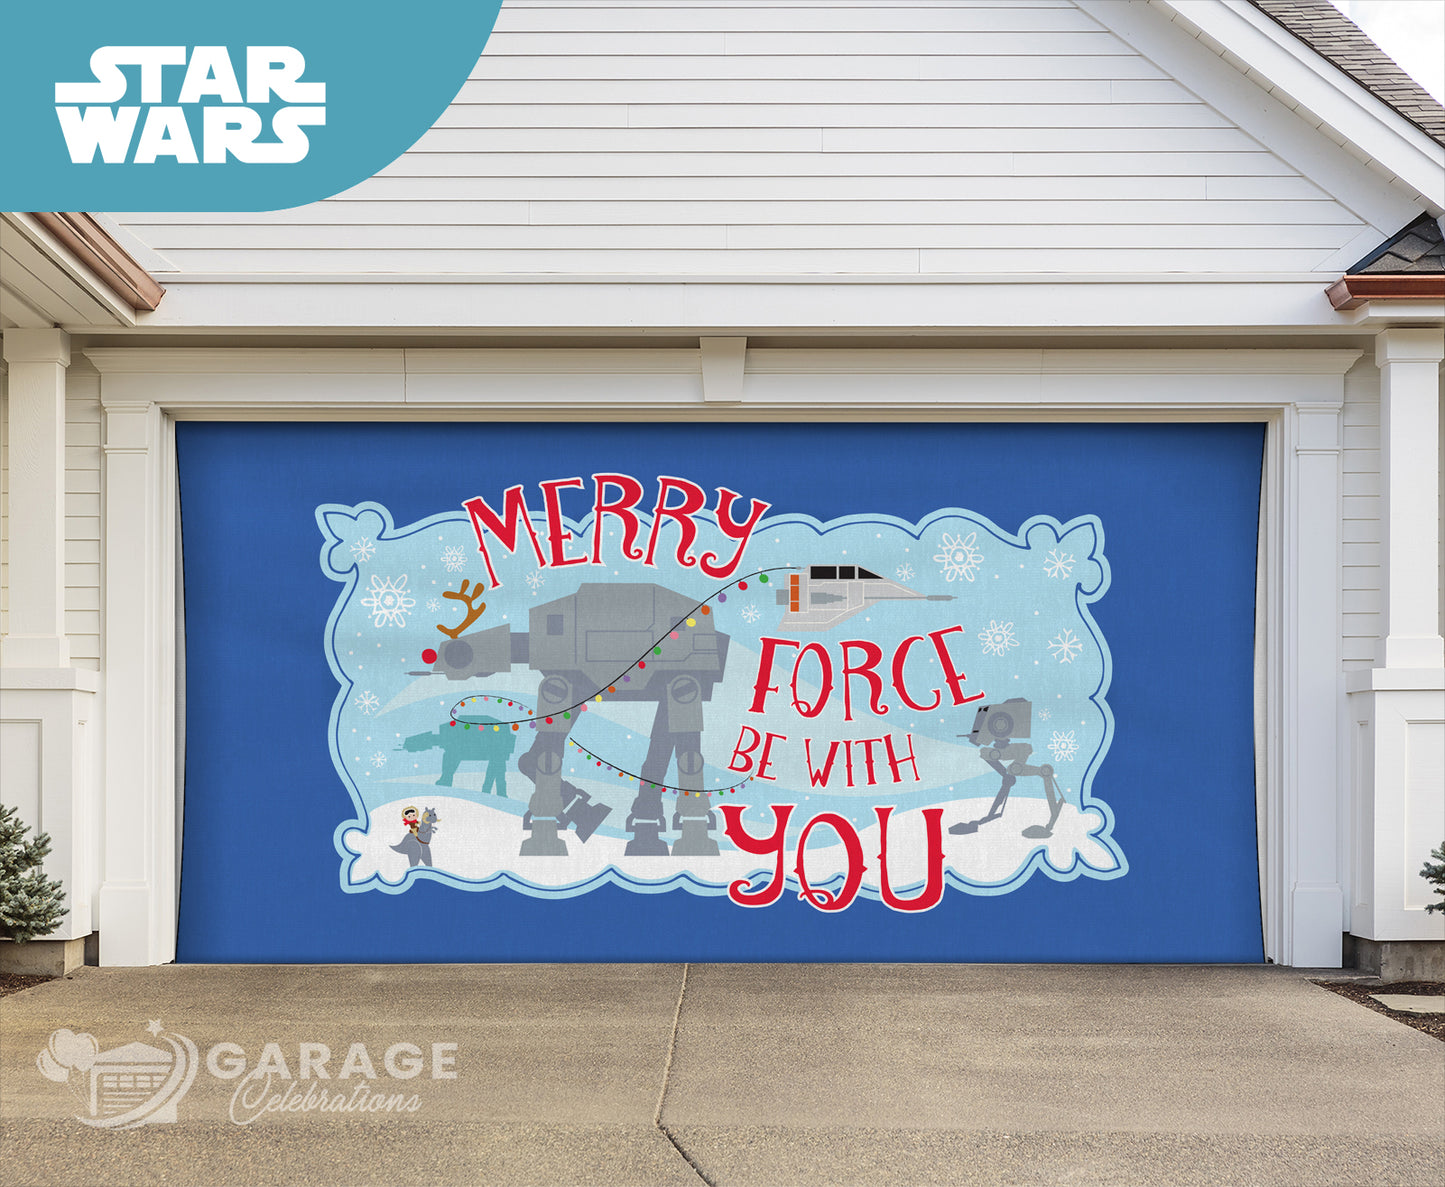 Merry Force Be With You